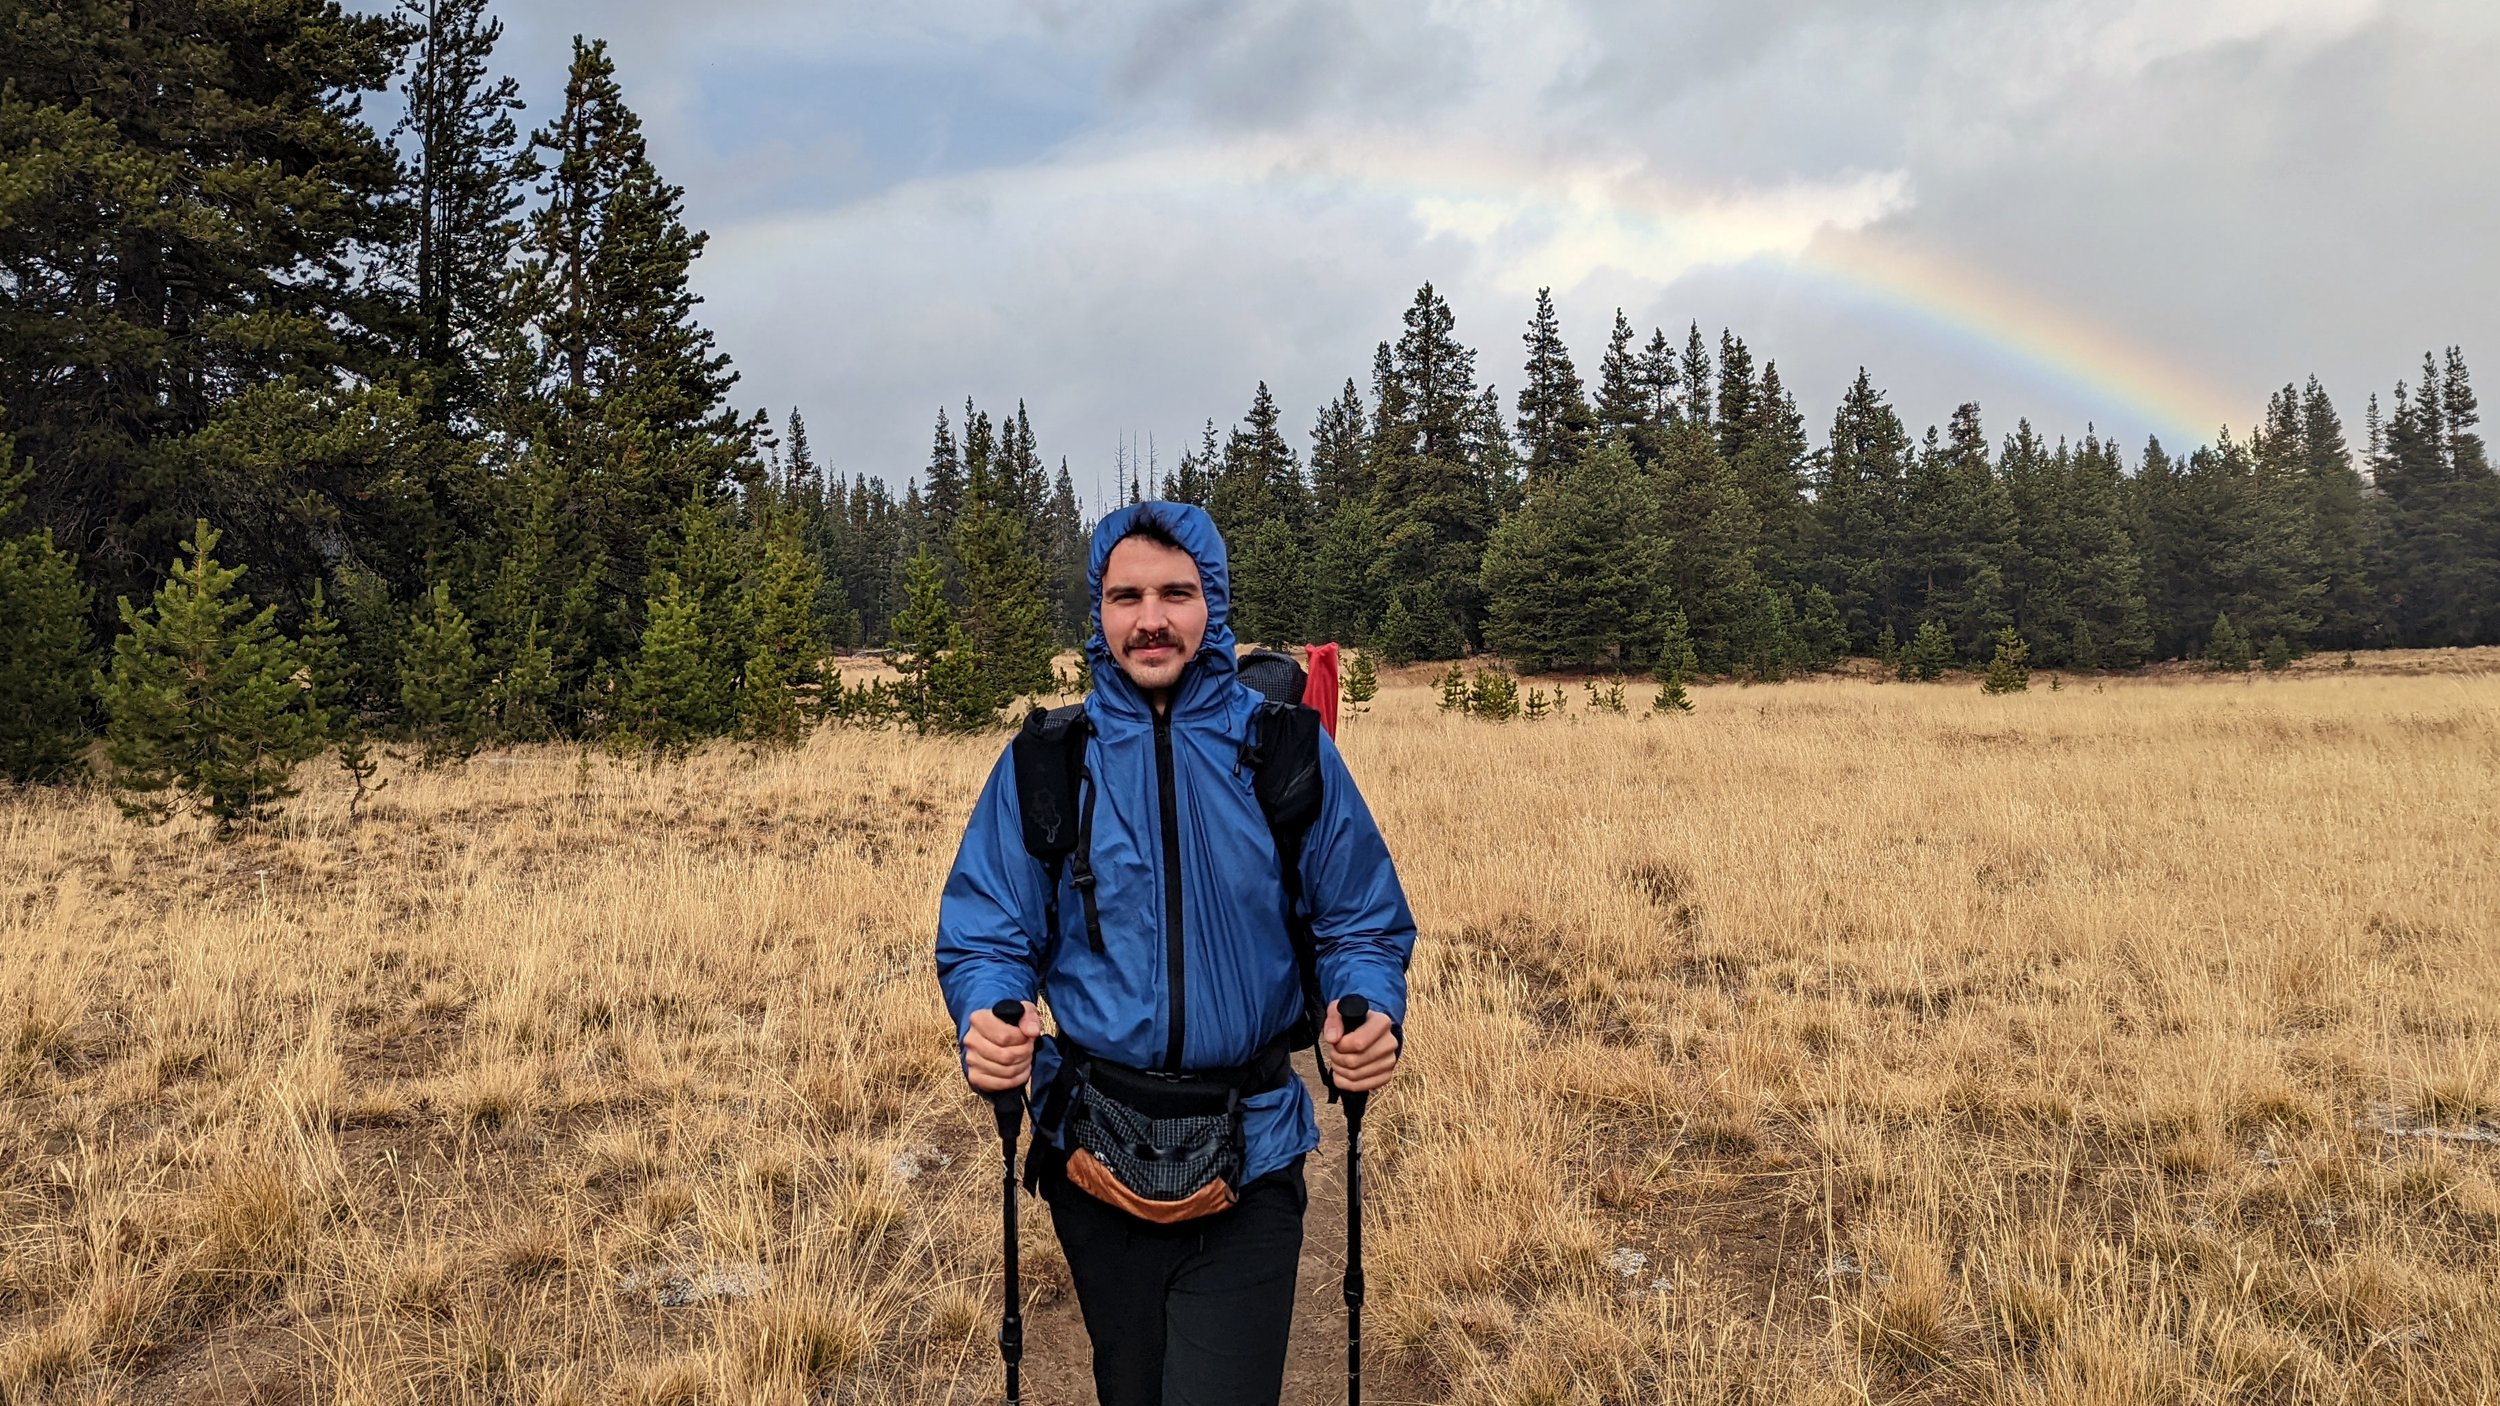 Montbell Versalite Jacket Review — Ultimate Gear Lists